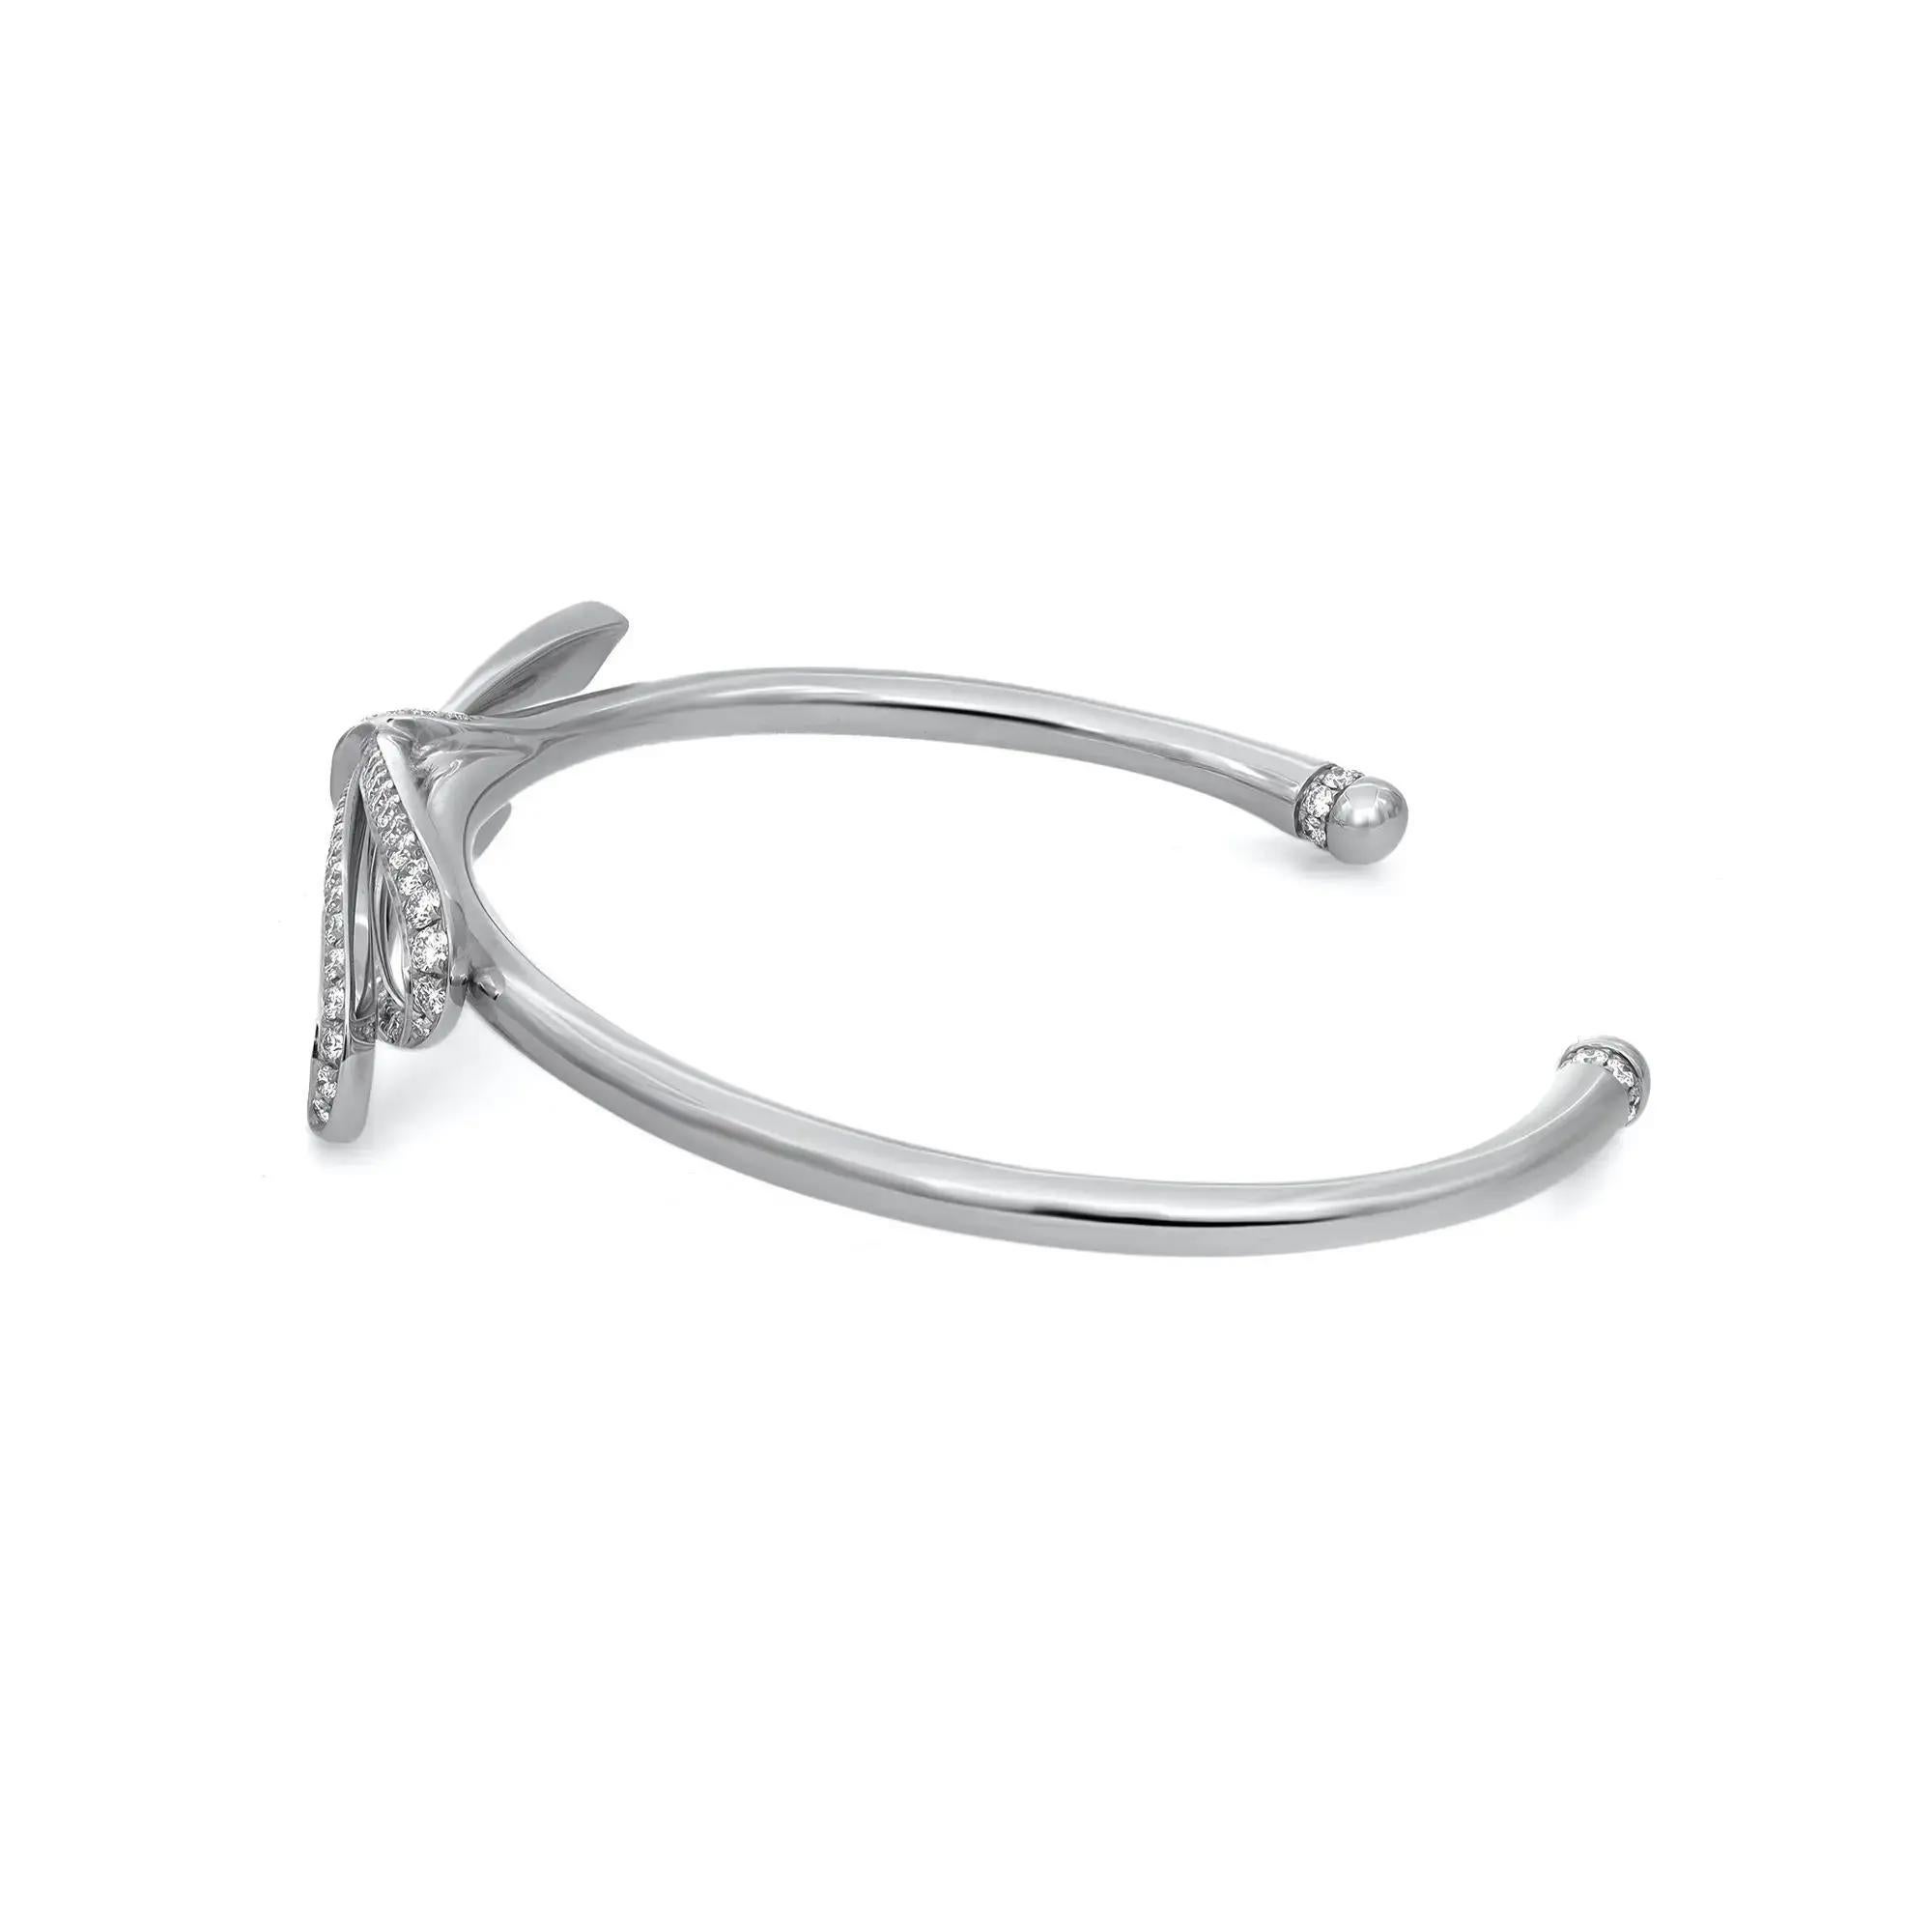 This gorgeous Tiffiany & Co. Diamond Large Bow Cuff Bracelet exudes sophistication. Stunningly crafted in lustrous 18K white gold. It features a cuff style bangle bracelet with a large bow in the center studded with round brilliant cut diamonds in